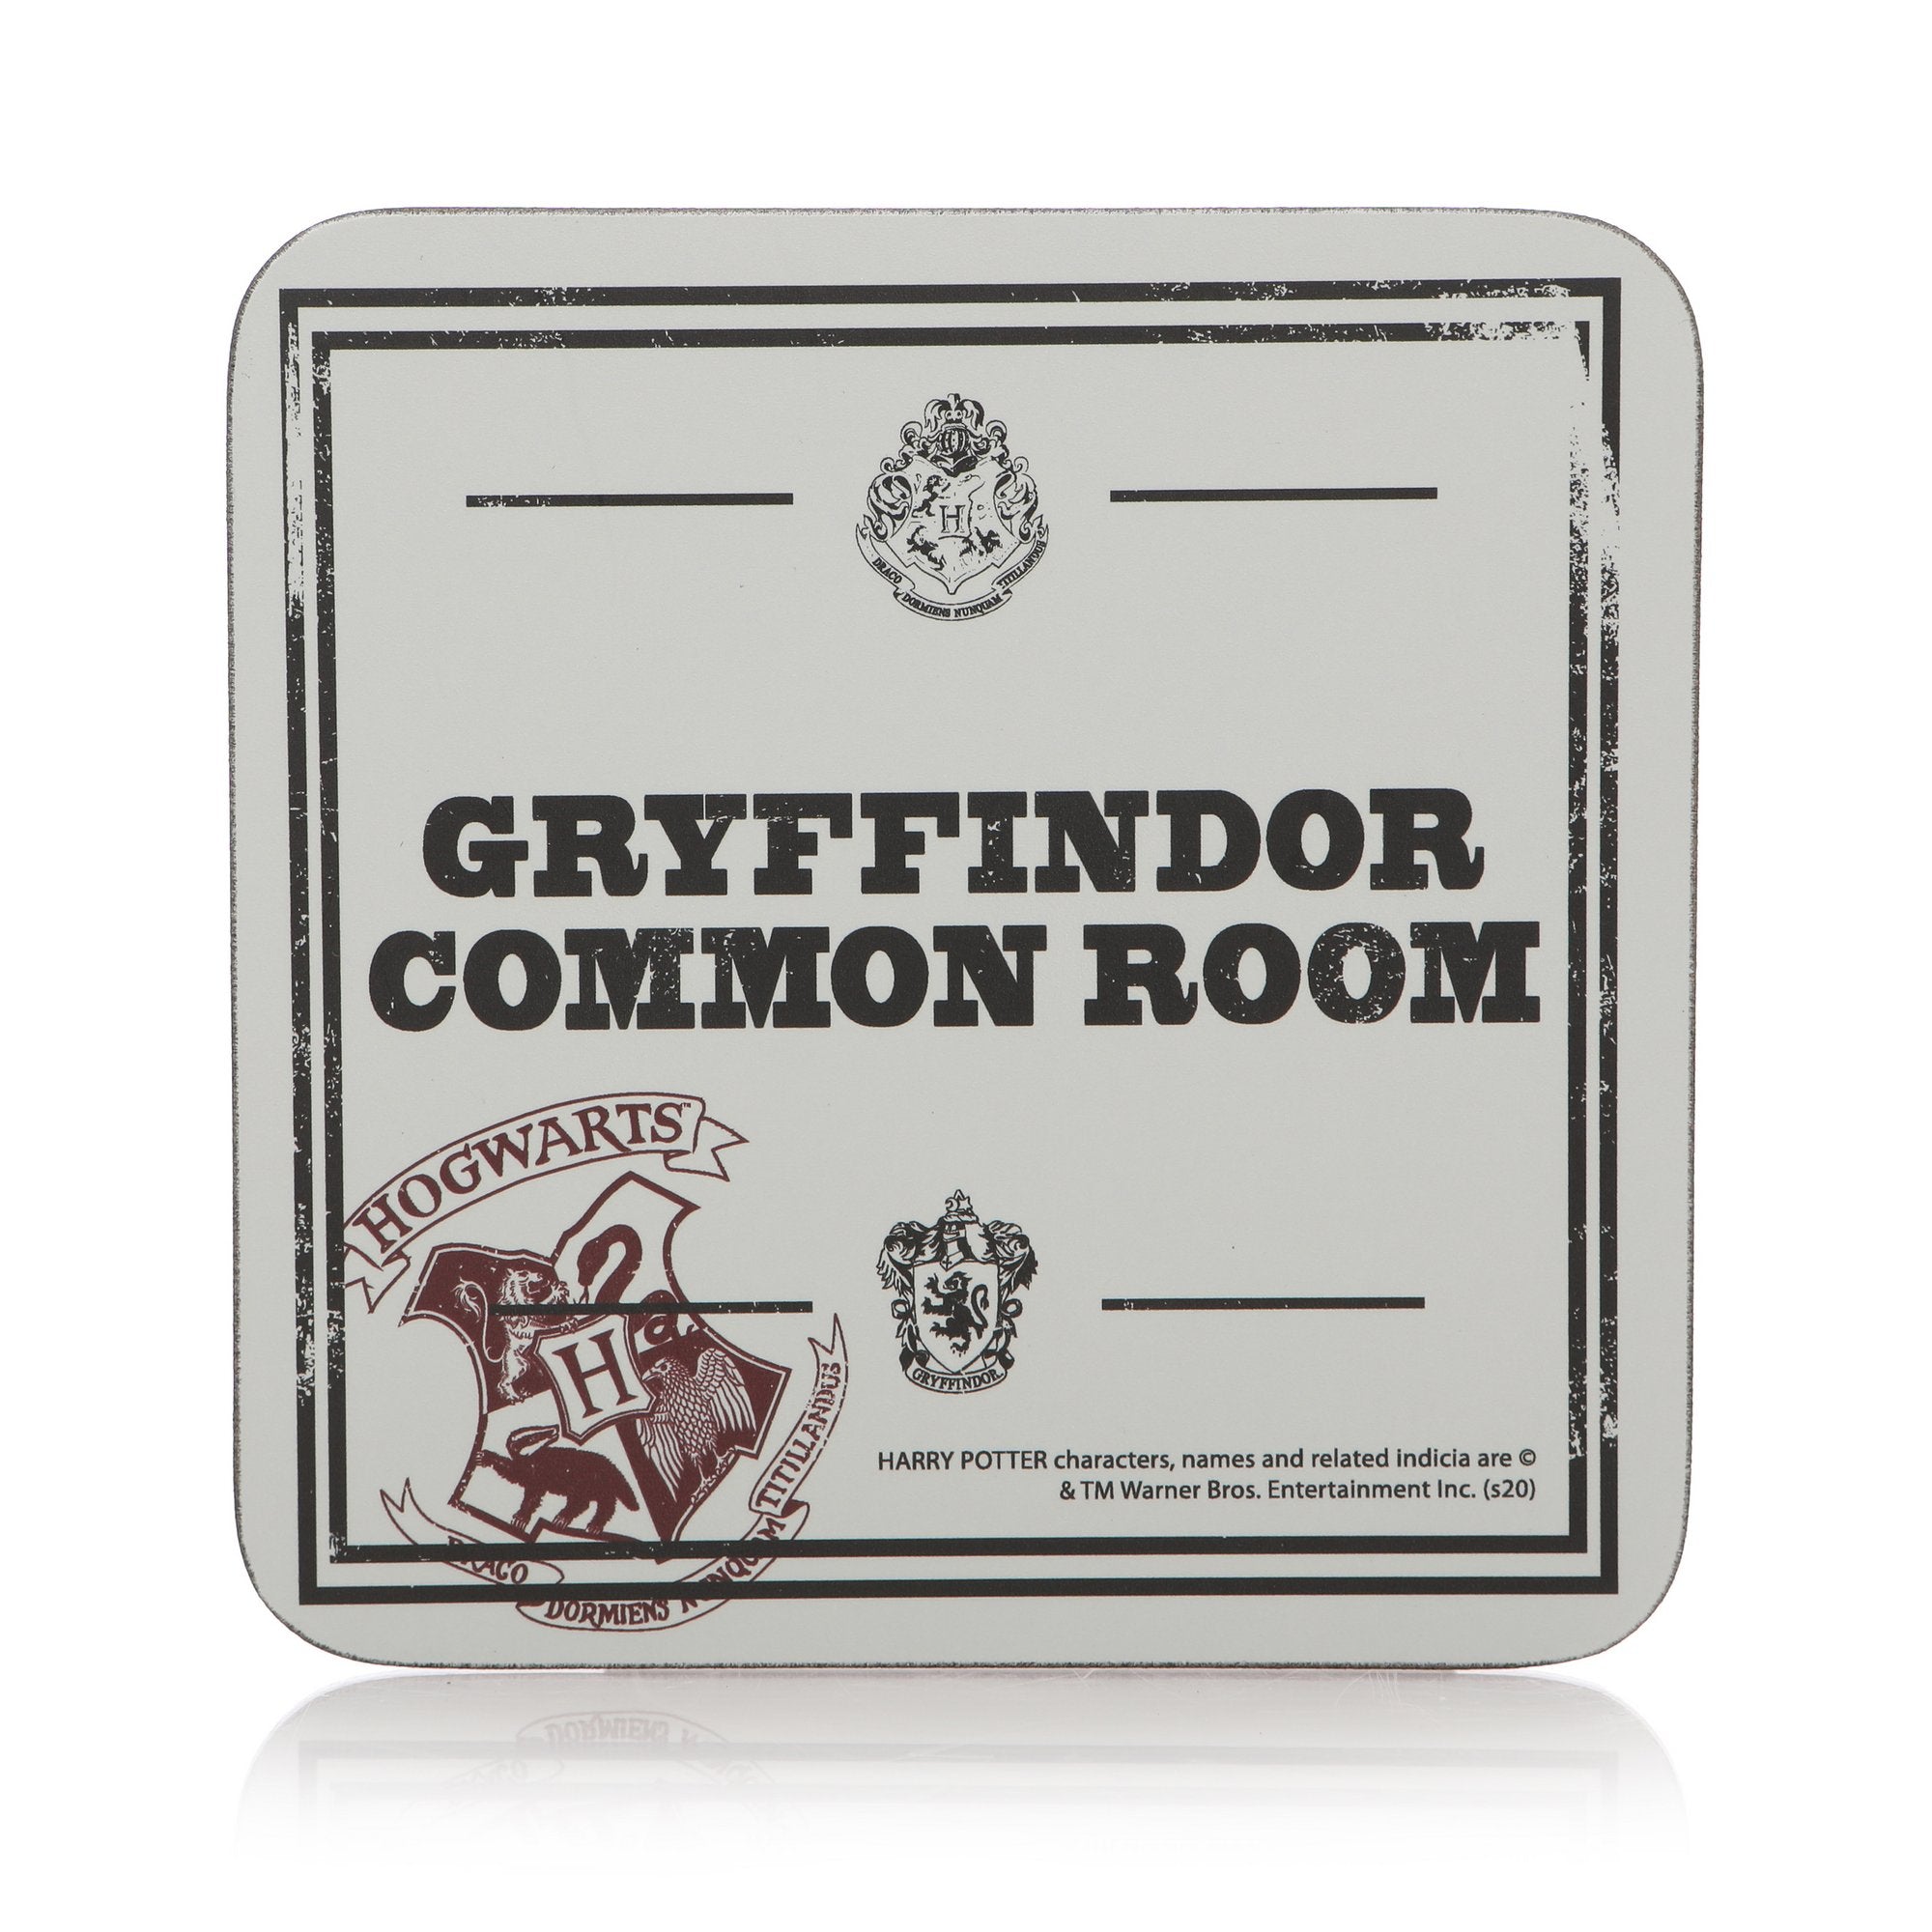 Harry Potter Coaster - Gryffindor Common Room